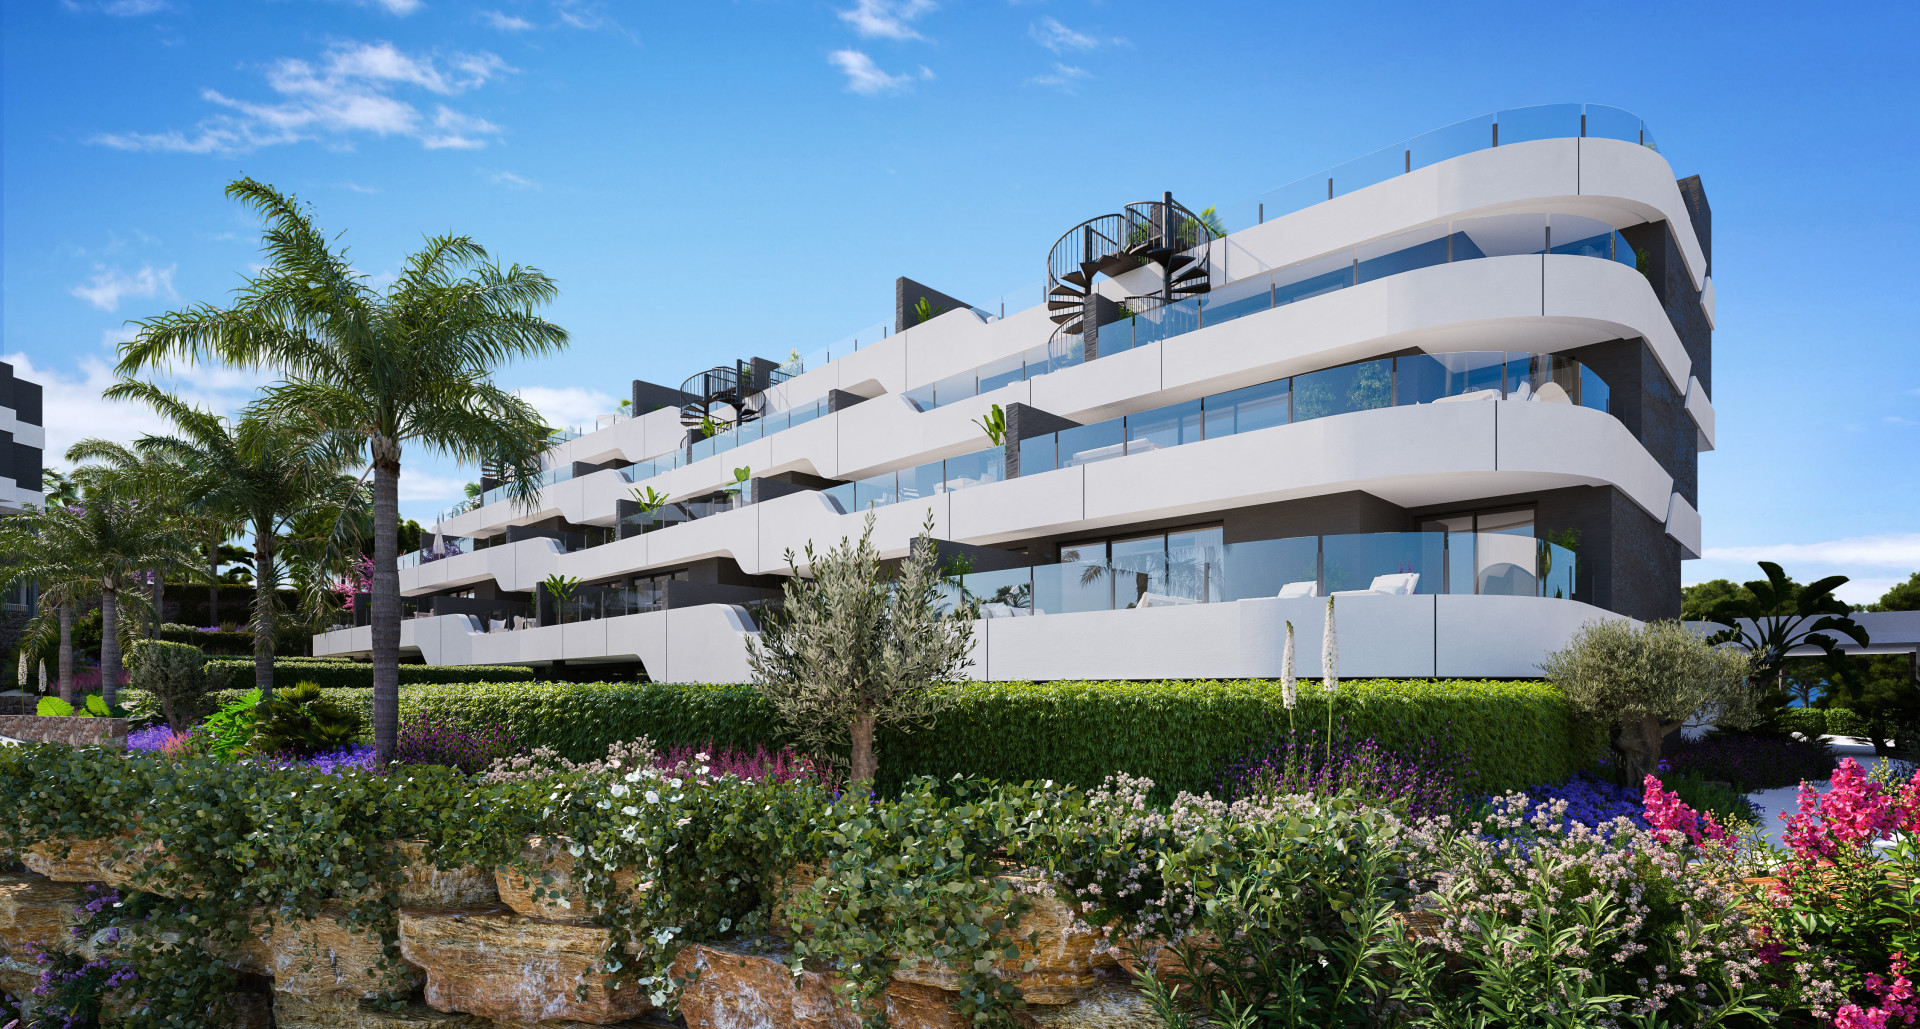 Oasis 325 Phase II: 2 and 3 bedroom apartments in the area of La Resina, Estepona. | Image 3